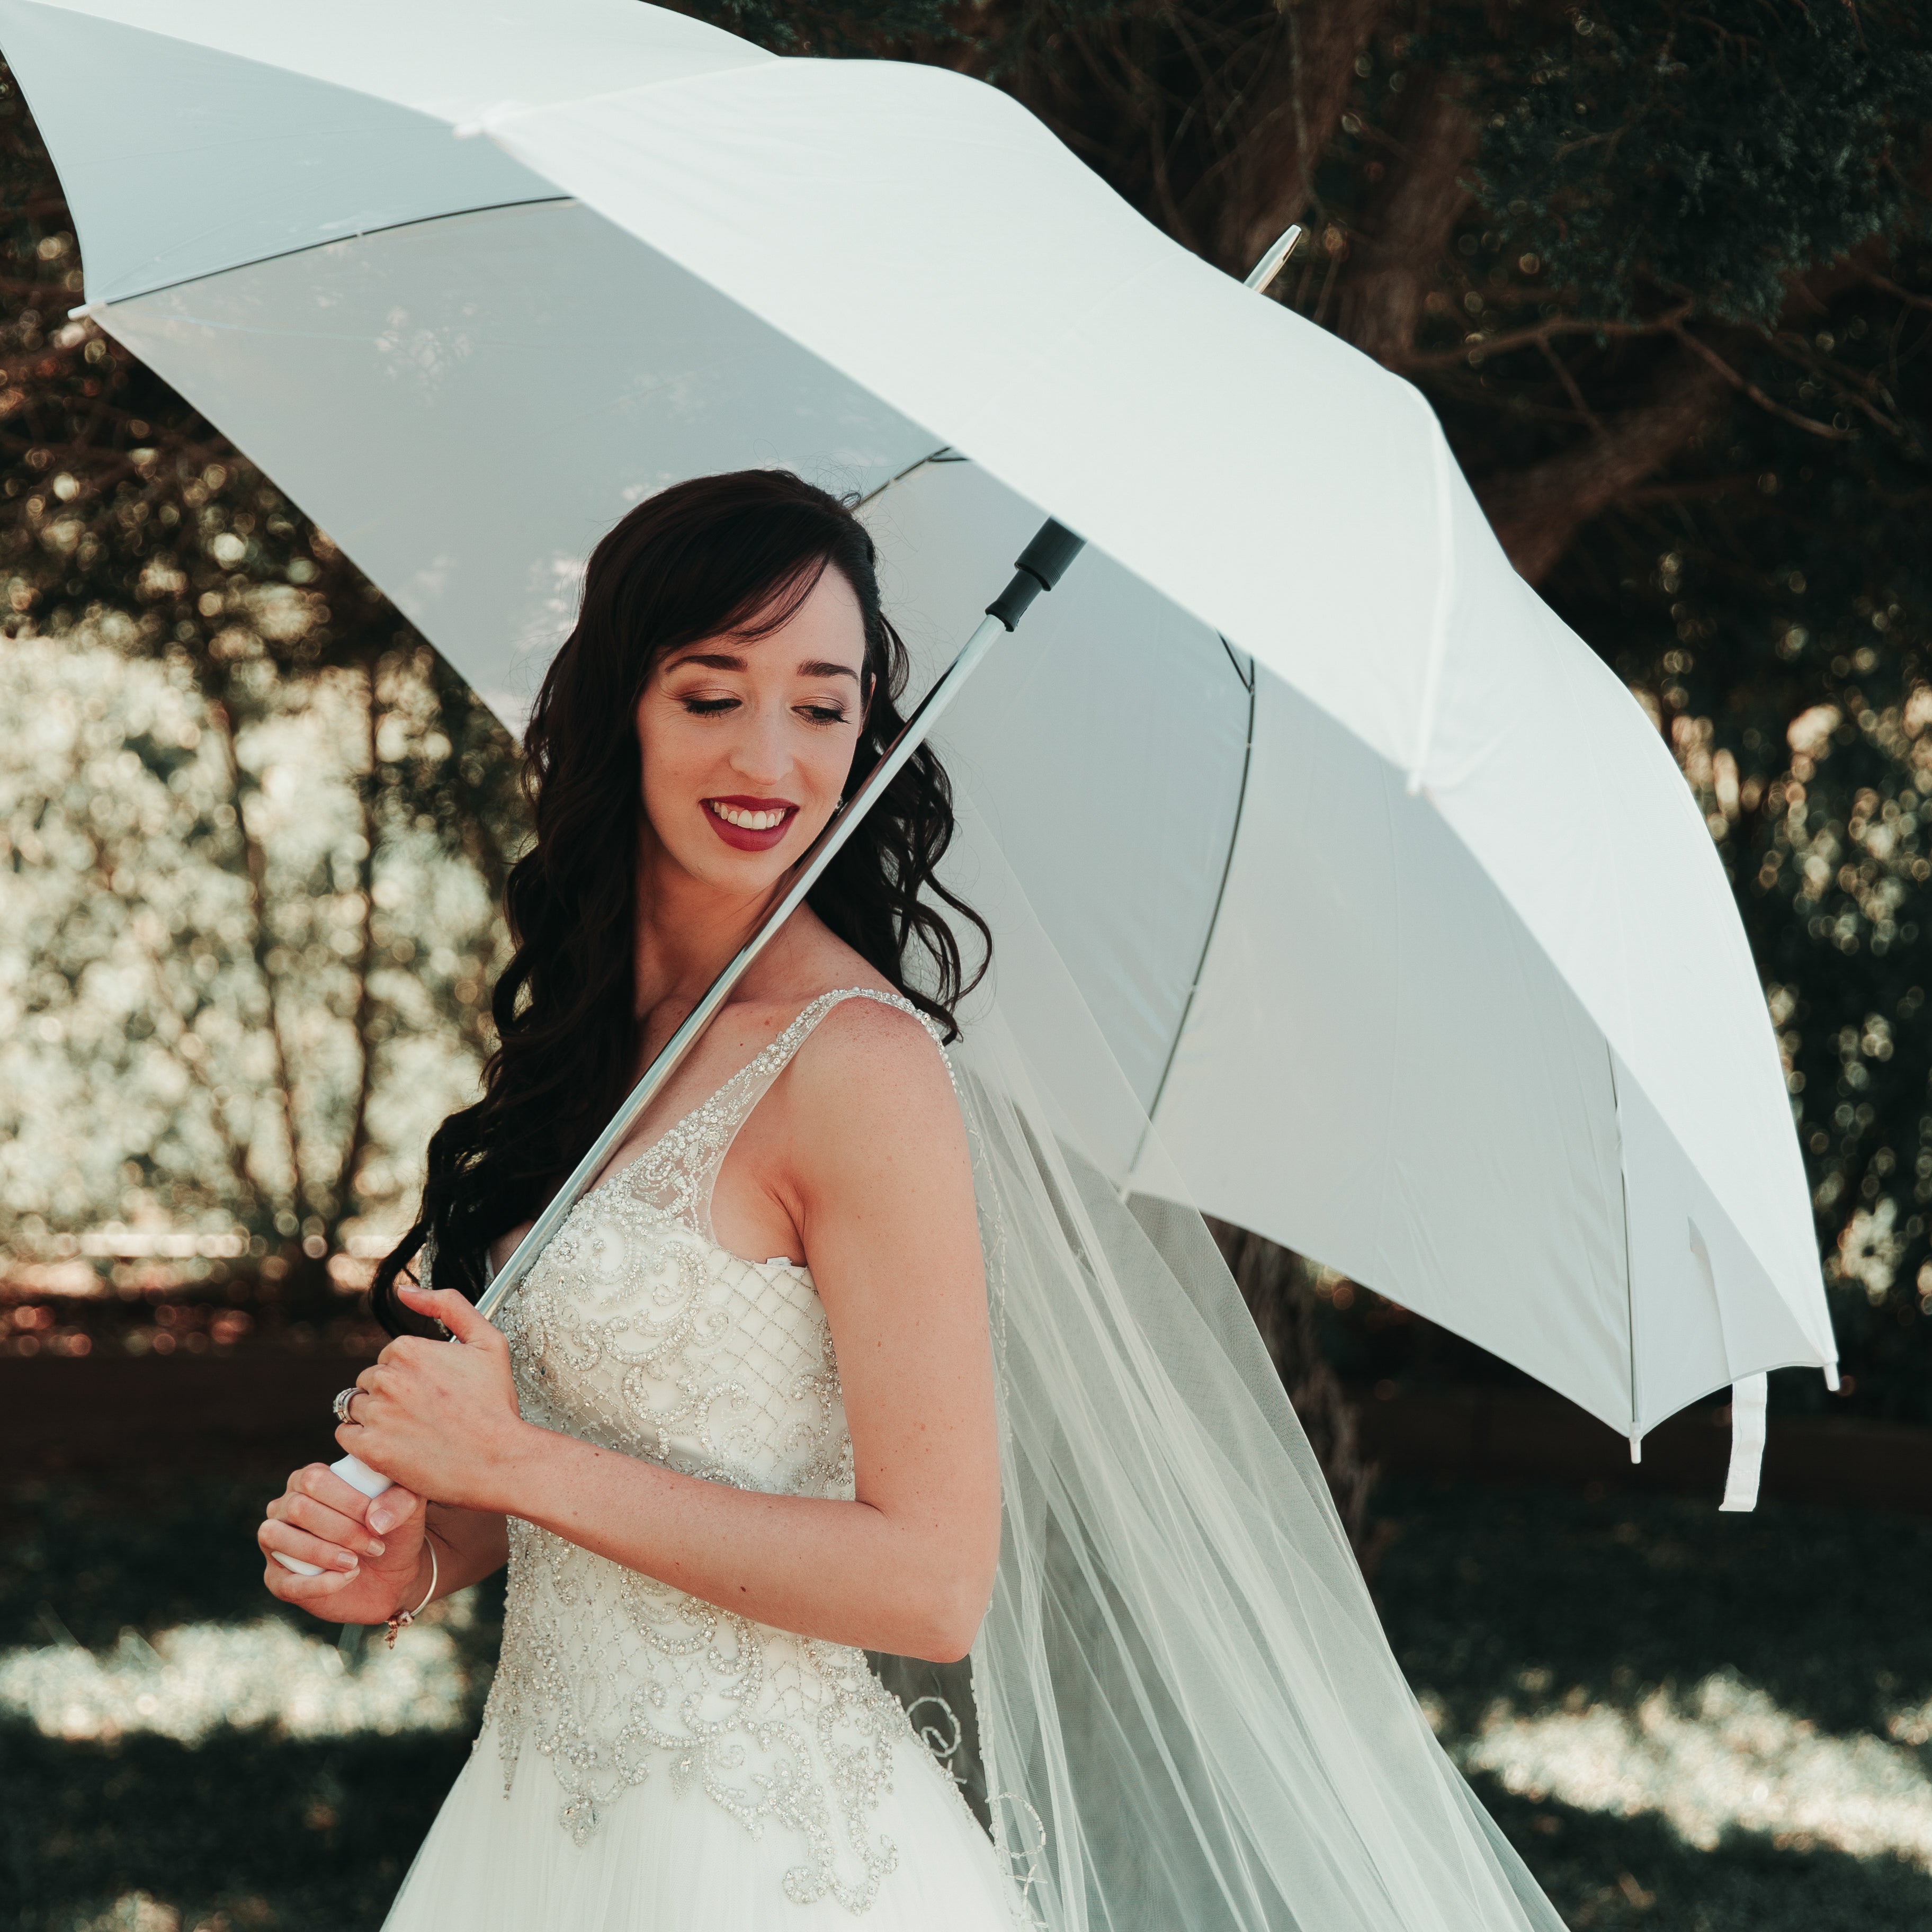 Vintage Portrait Of A Stunning Aristocratic Girl In A White Lace Dress  Walking Outdoors Holding A White Umbrella In Her Hands. Victorian Era.  Stock Photo, Picture and Royalty Free Image. Image 185856125.